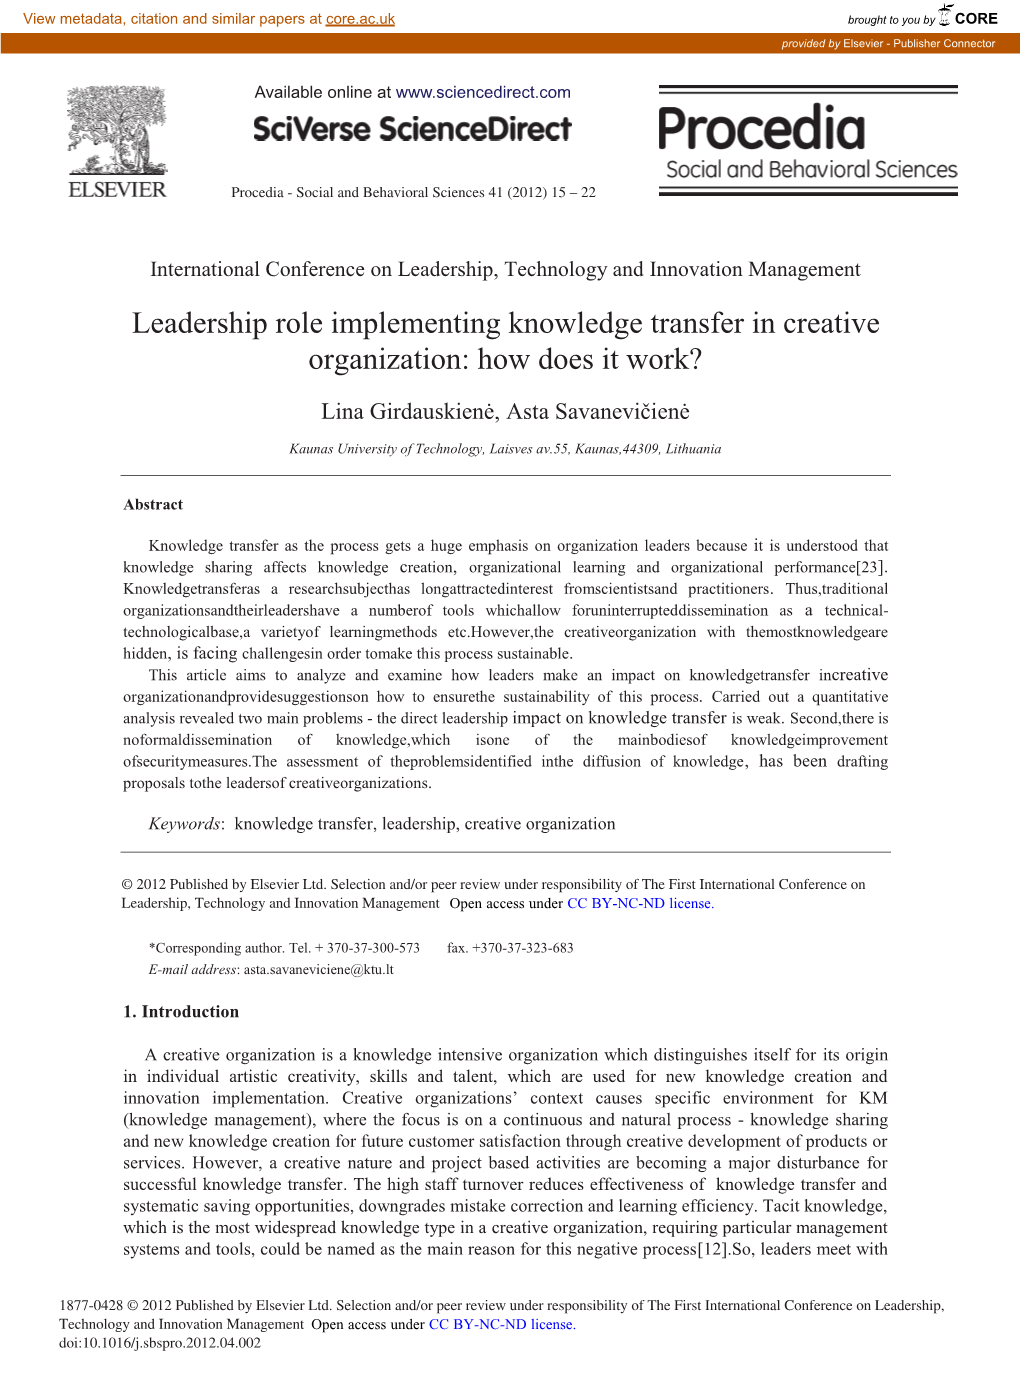 Leadership Role Implementing Knowledge Transfer in Creative Organization: How Does It Work?